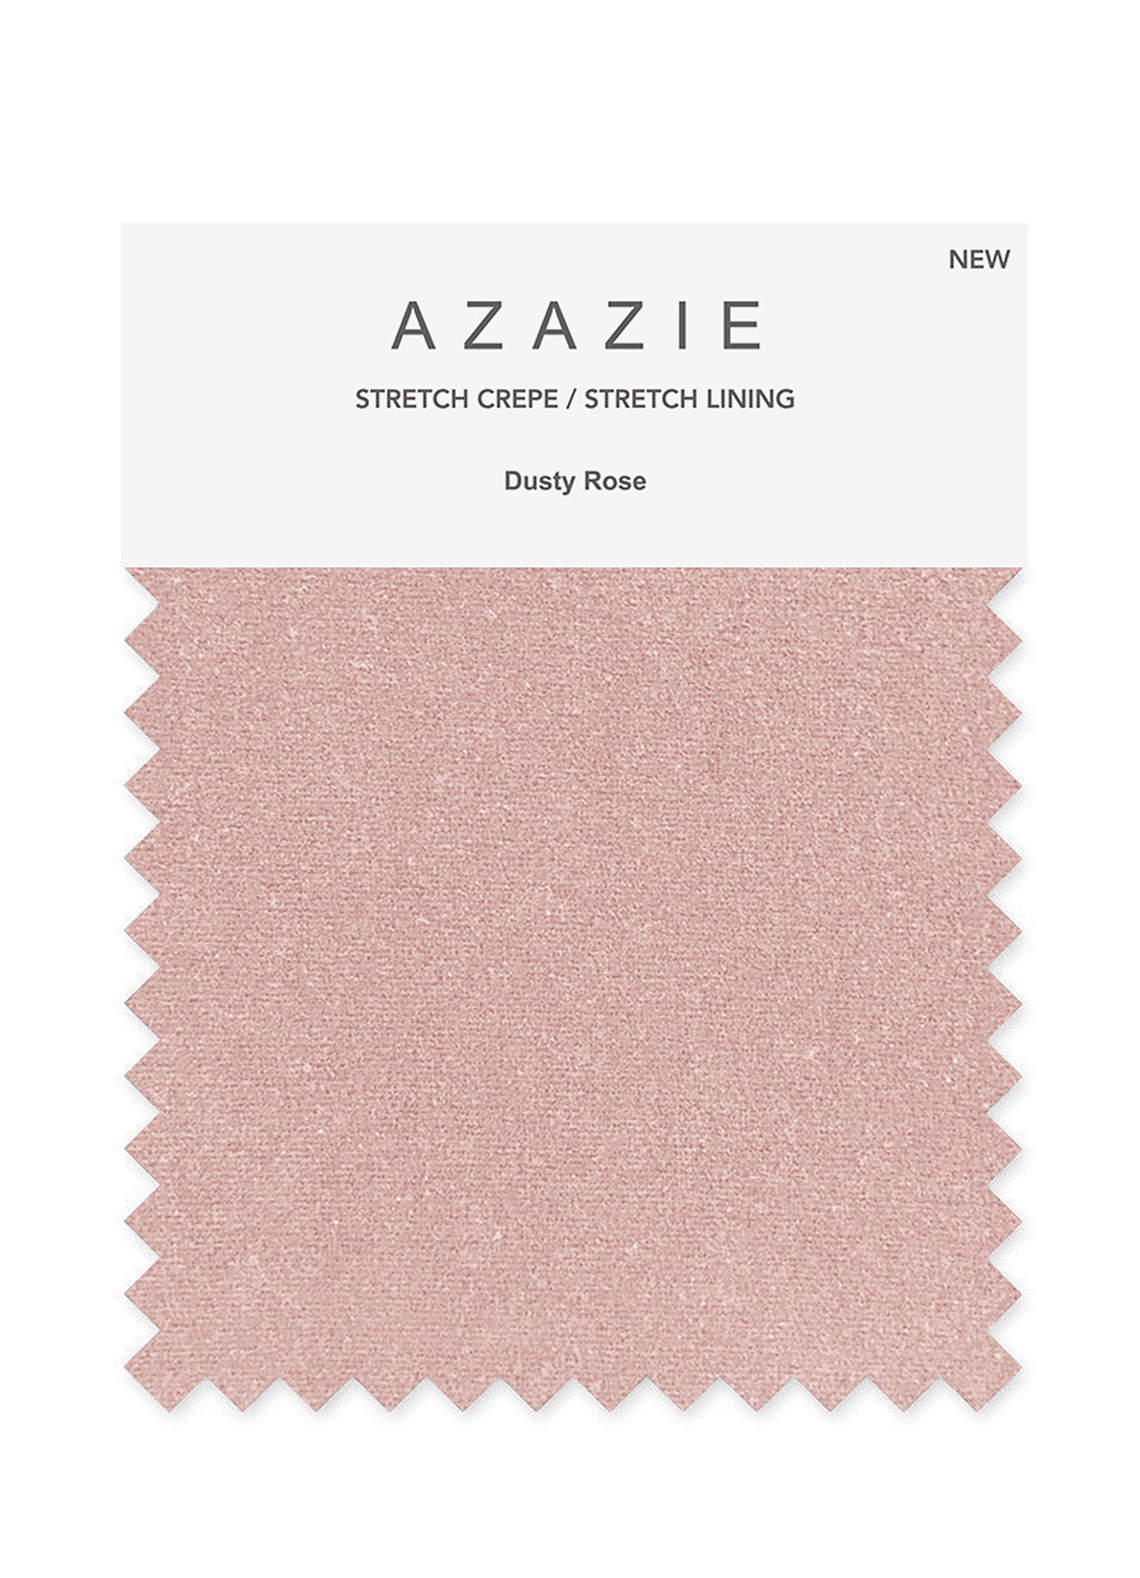 front Azazie Stretch Crepe Swatches